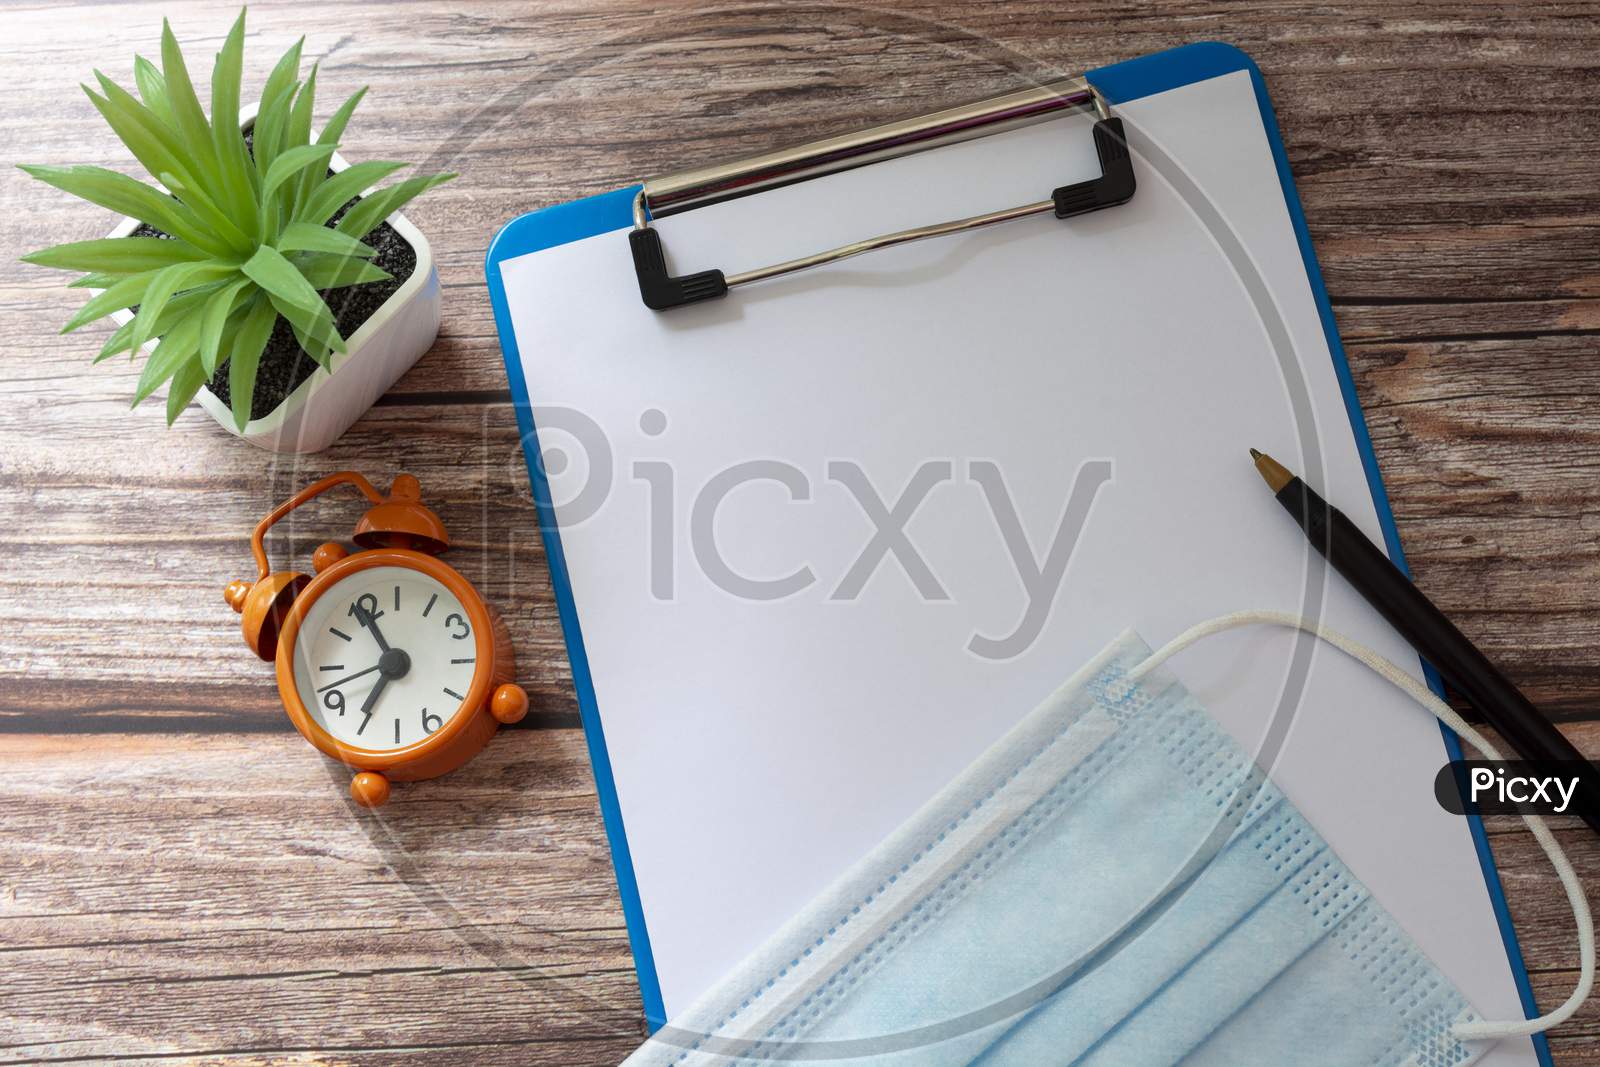 Face Mask On A Clipboard With Pen, Alarm Clock And Potted Plant On Wooden Desk. For Text Use